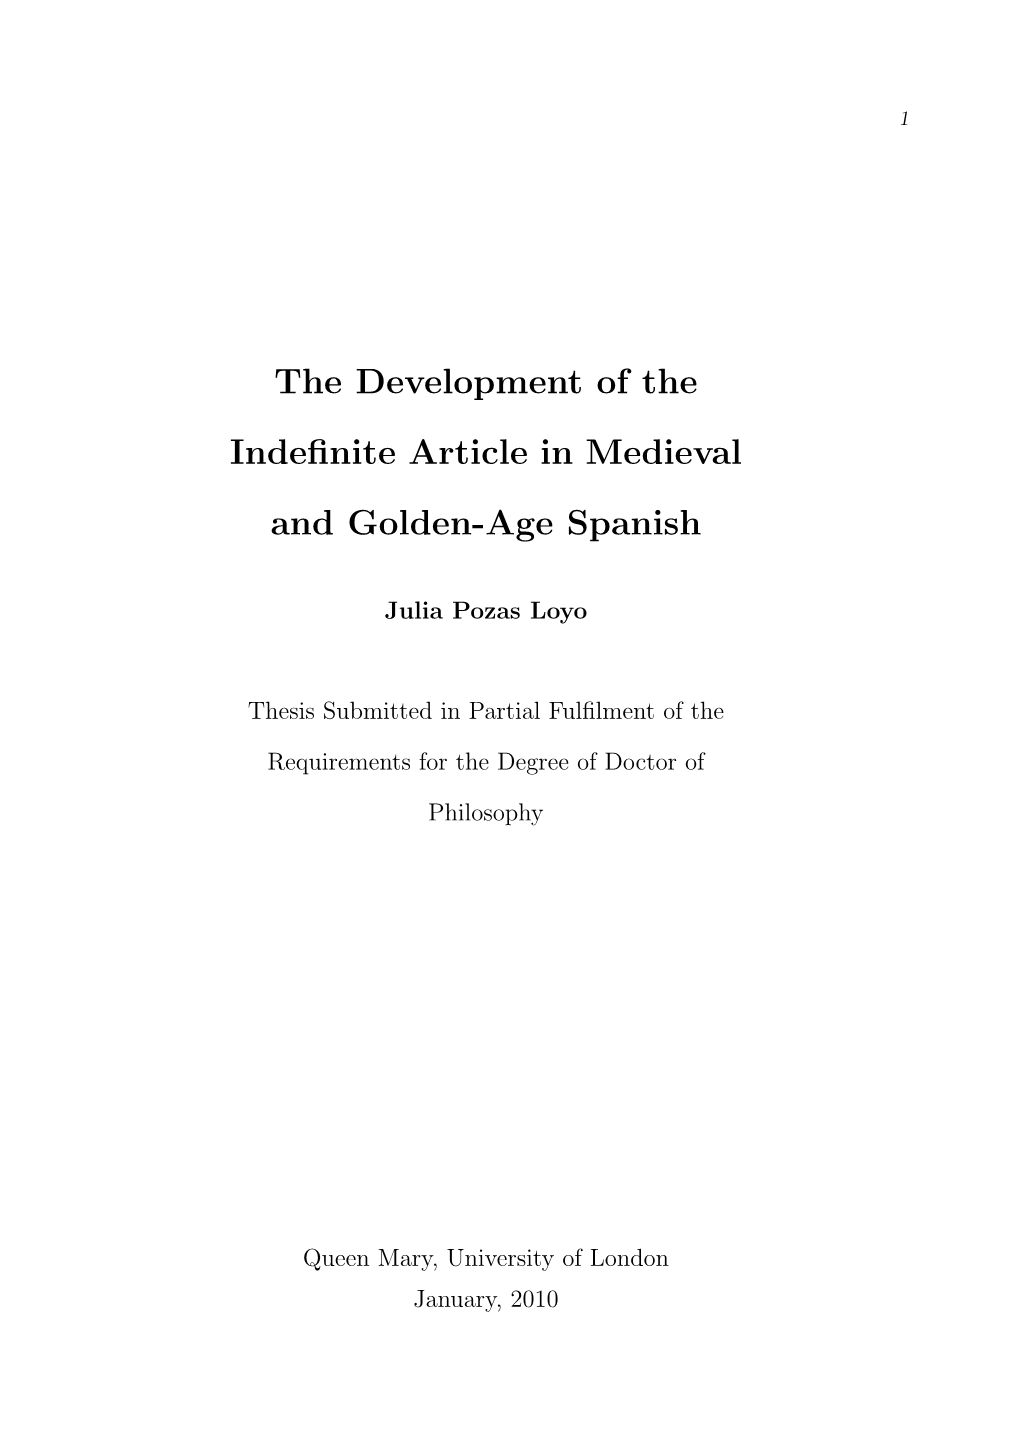 The Development of the Indefinite Article in Medieval